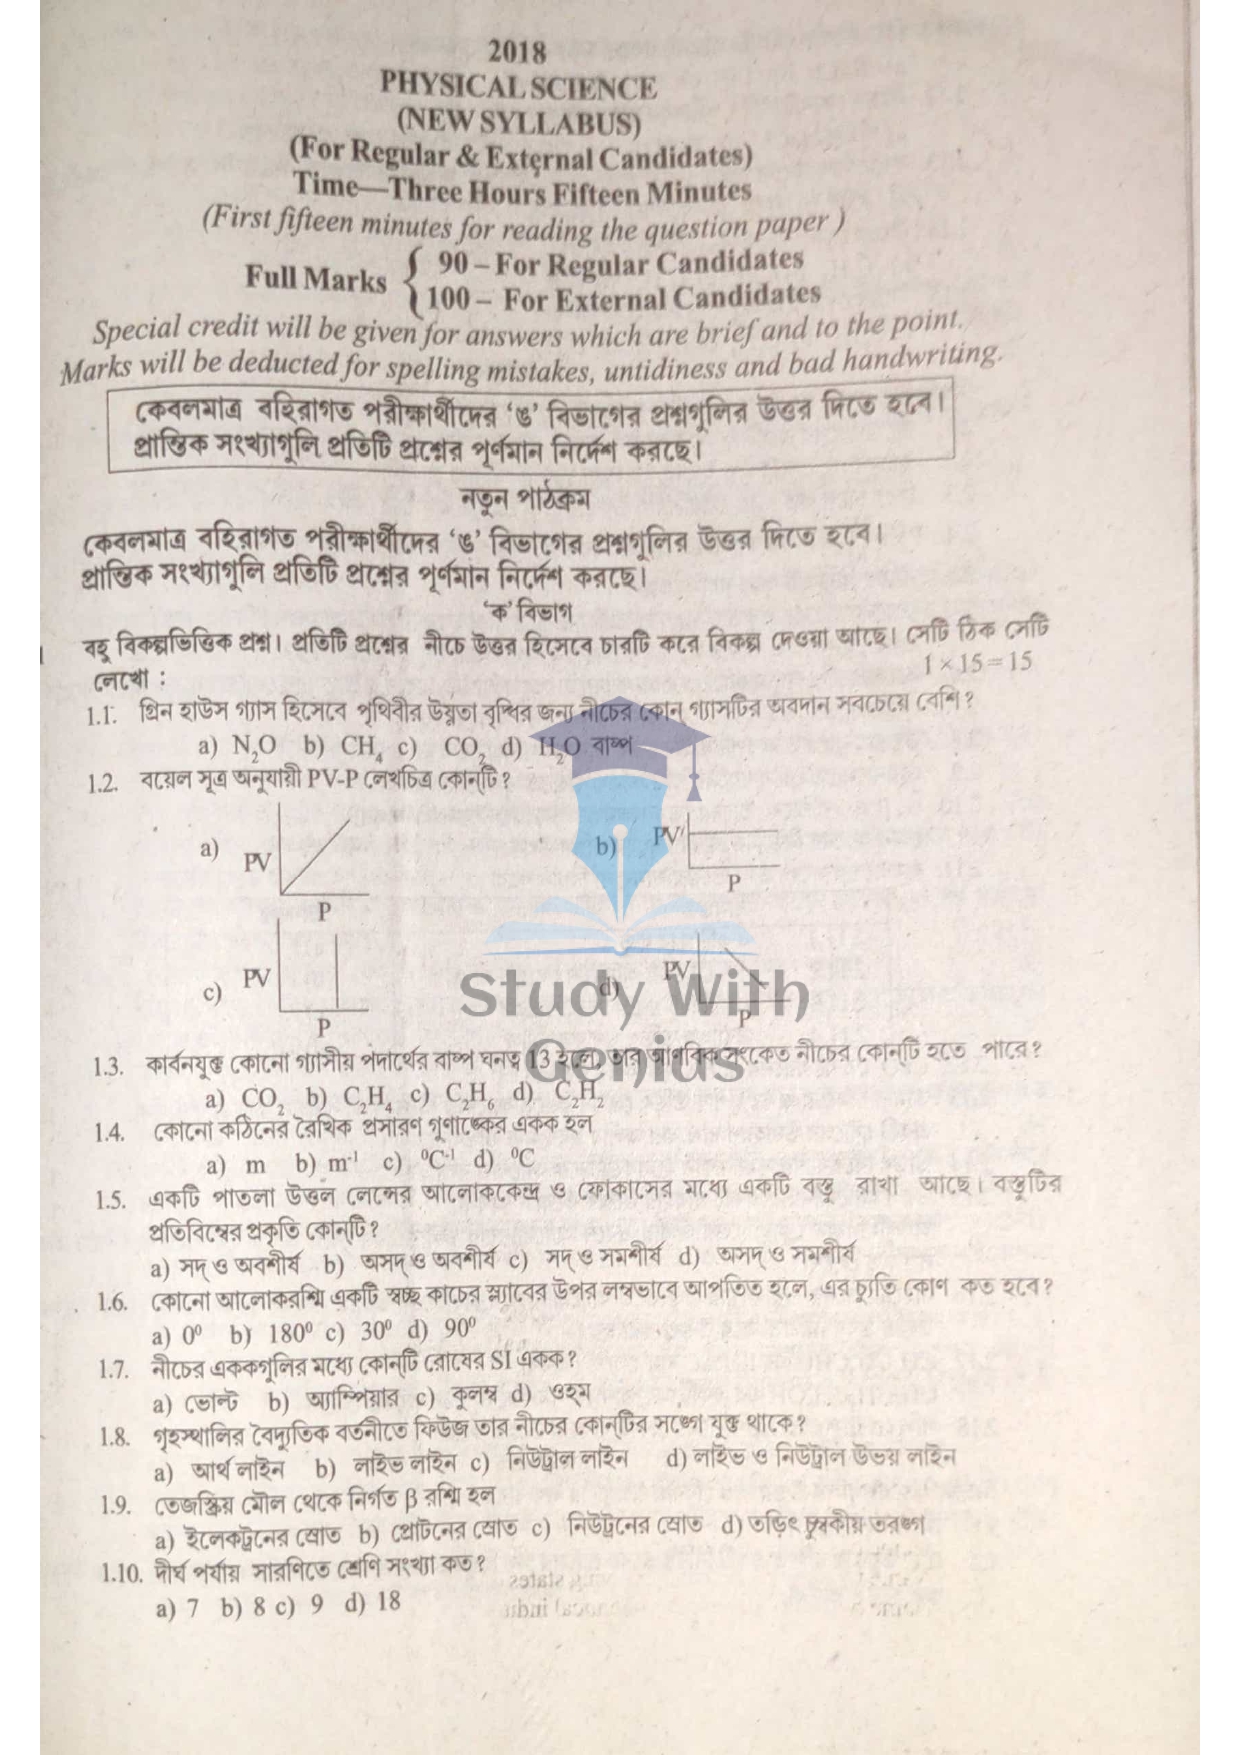 WBBSE Madhyamik Physical Science Subject Question Papers Bengali Medium 2018